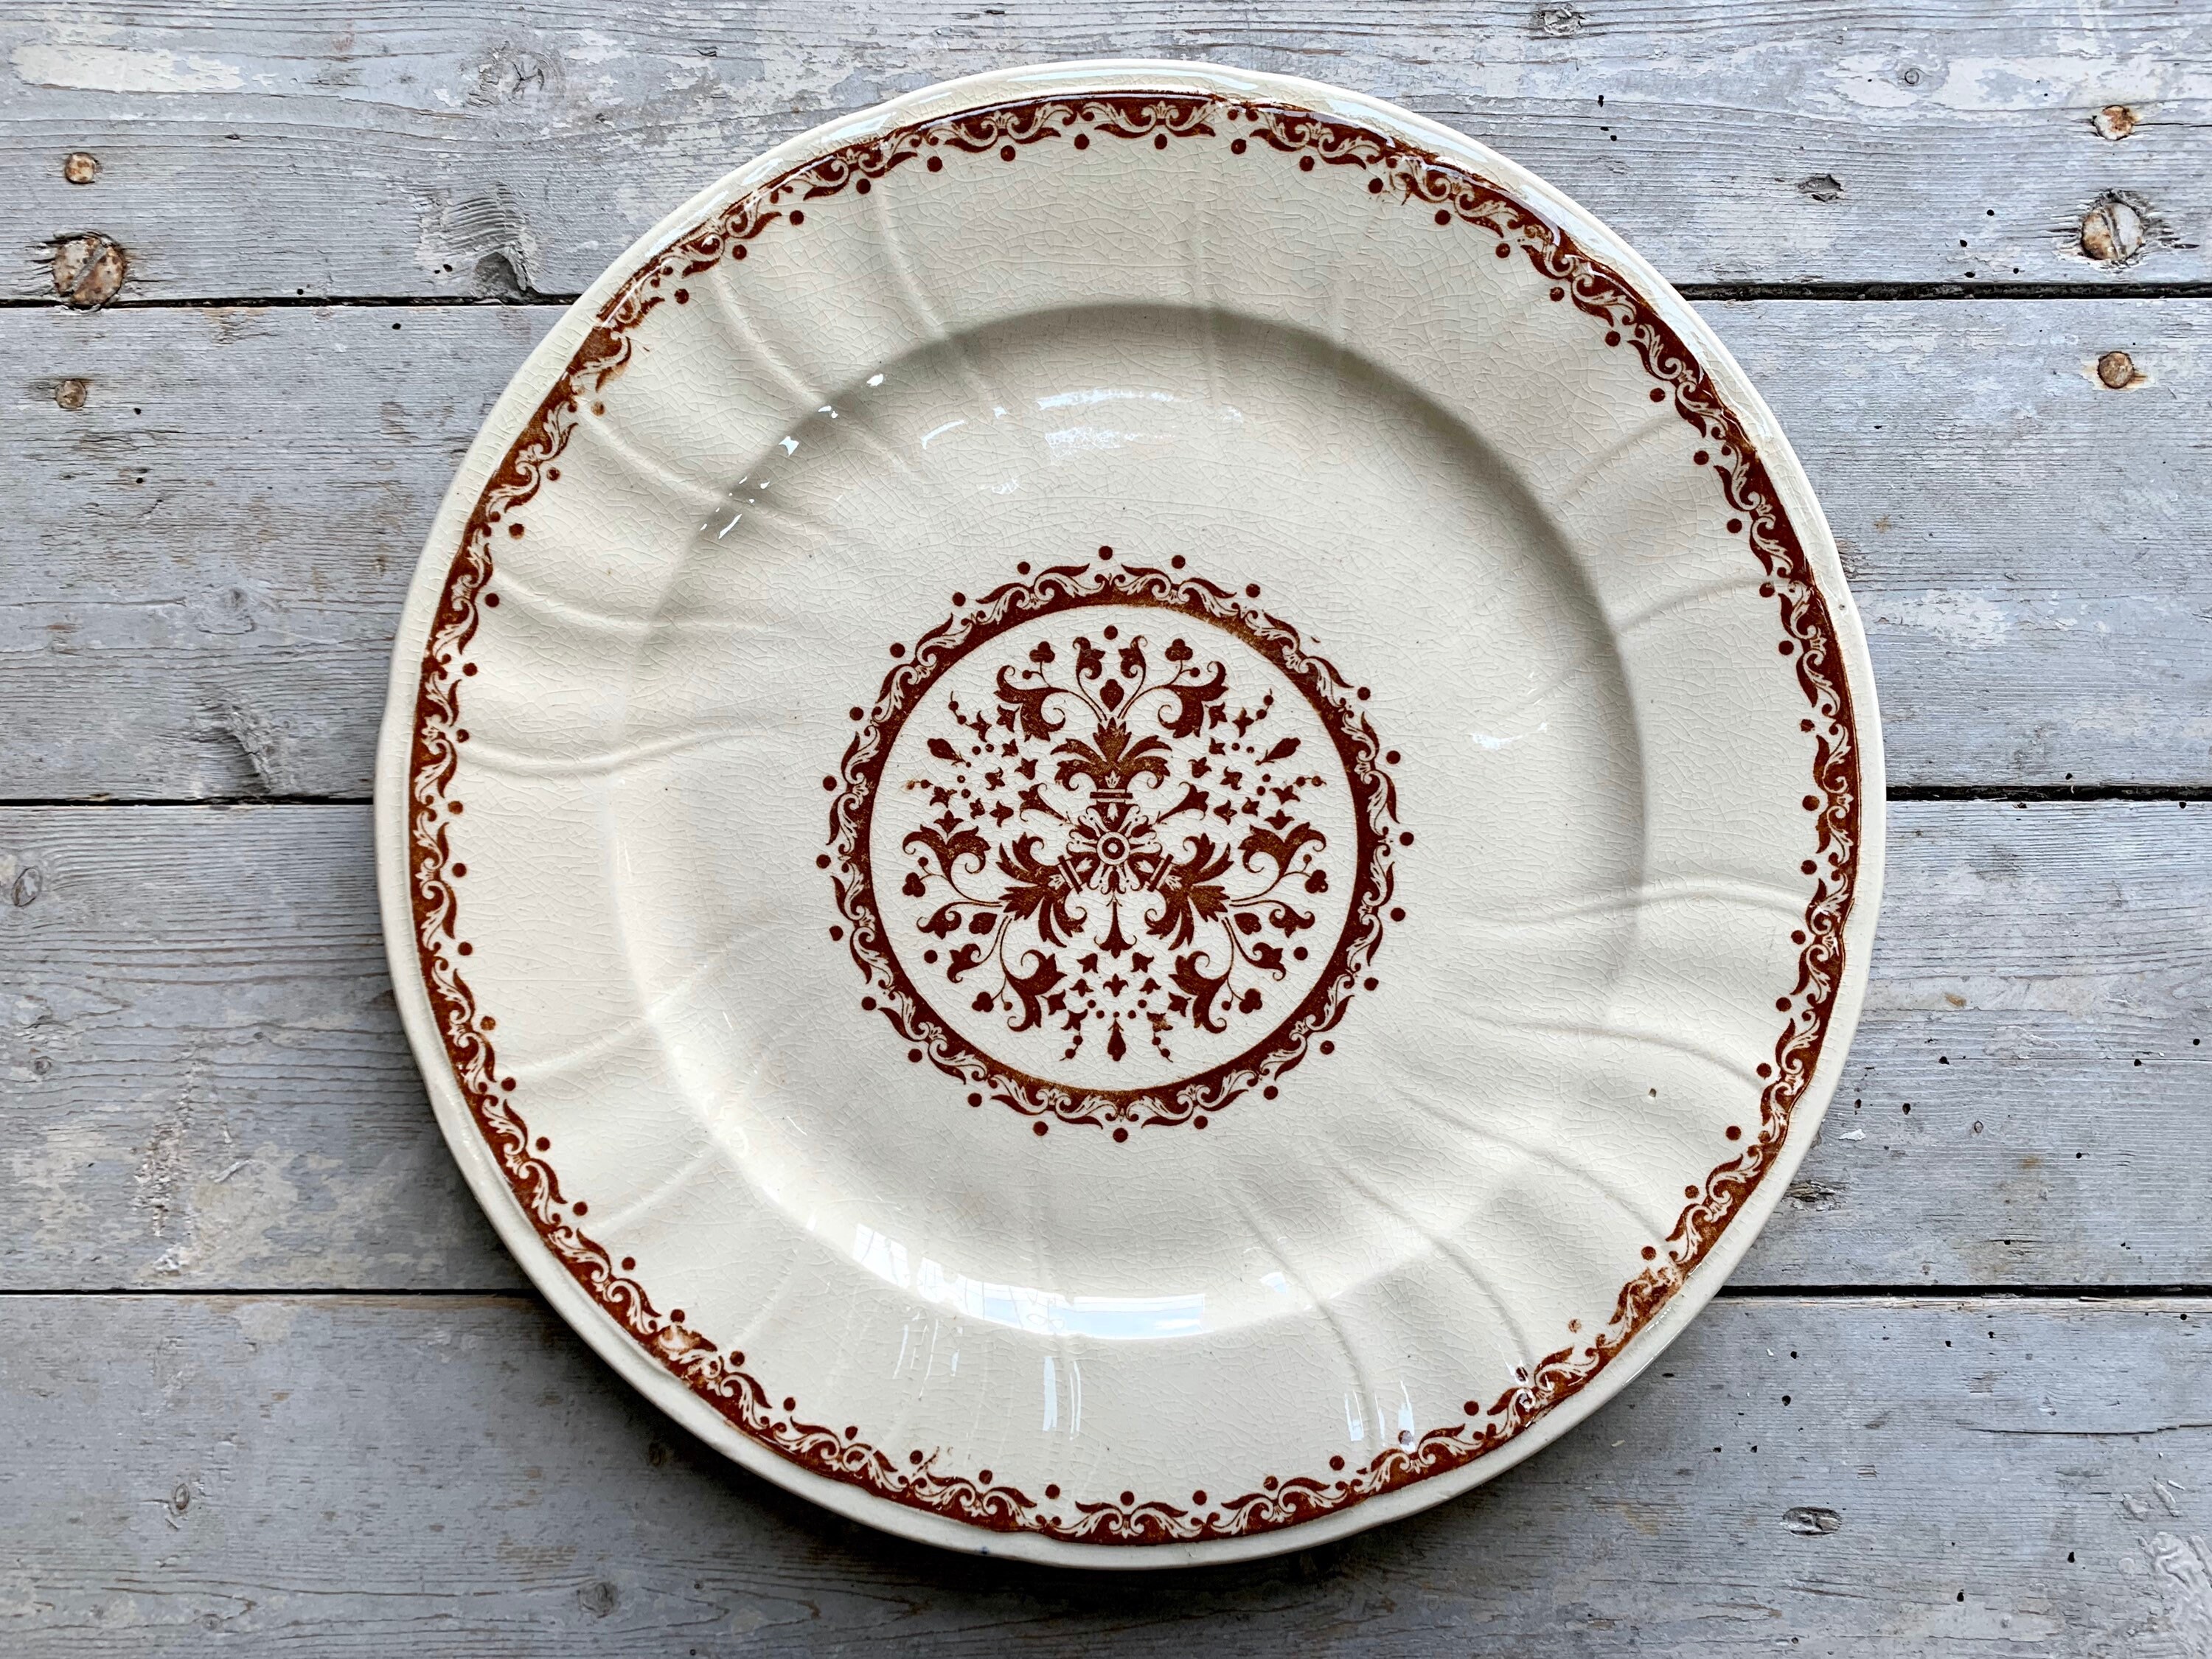 1850 ~ Ironstone Terre de Fer Rare Plate French Antique Made in France By Gien Brown Rocaille Style 